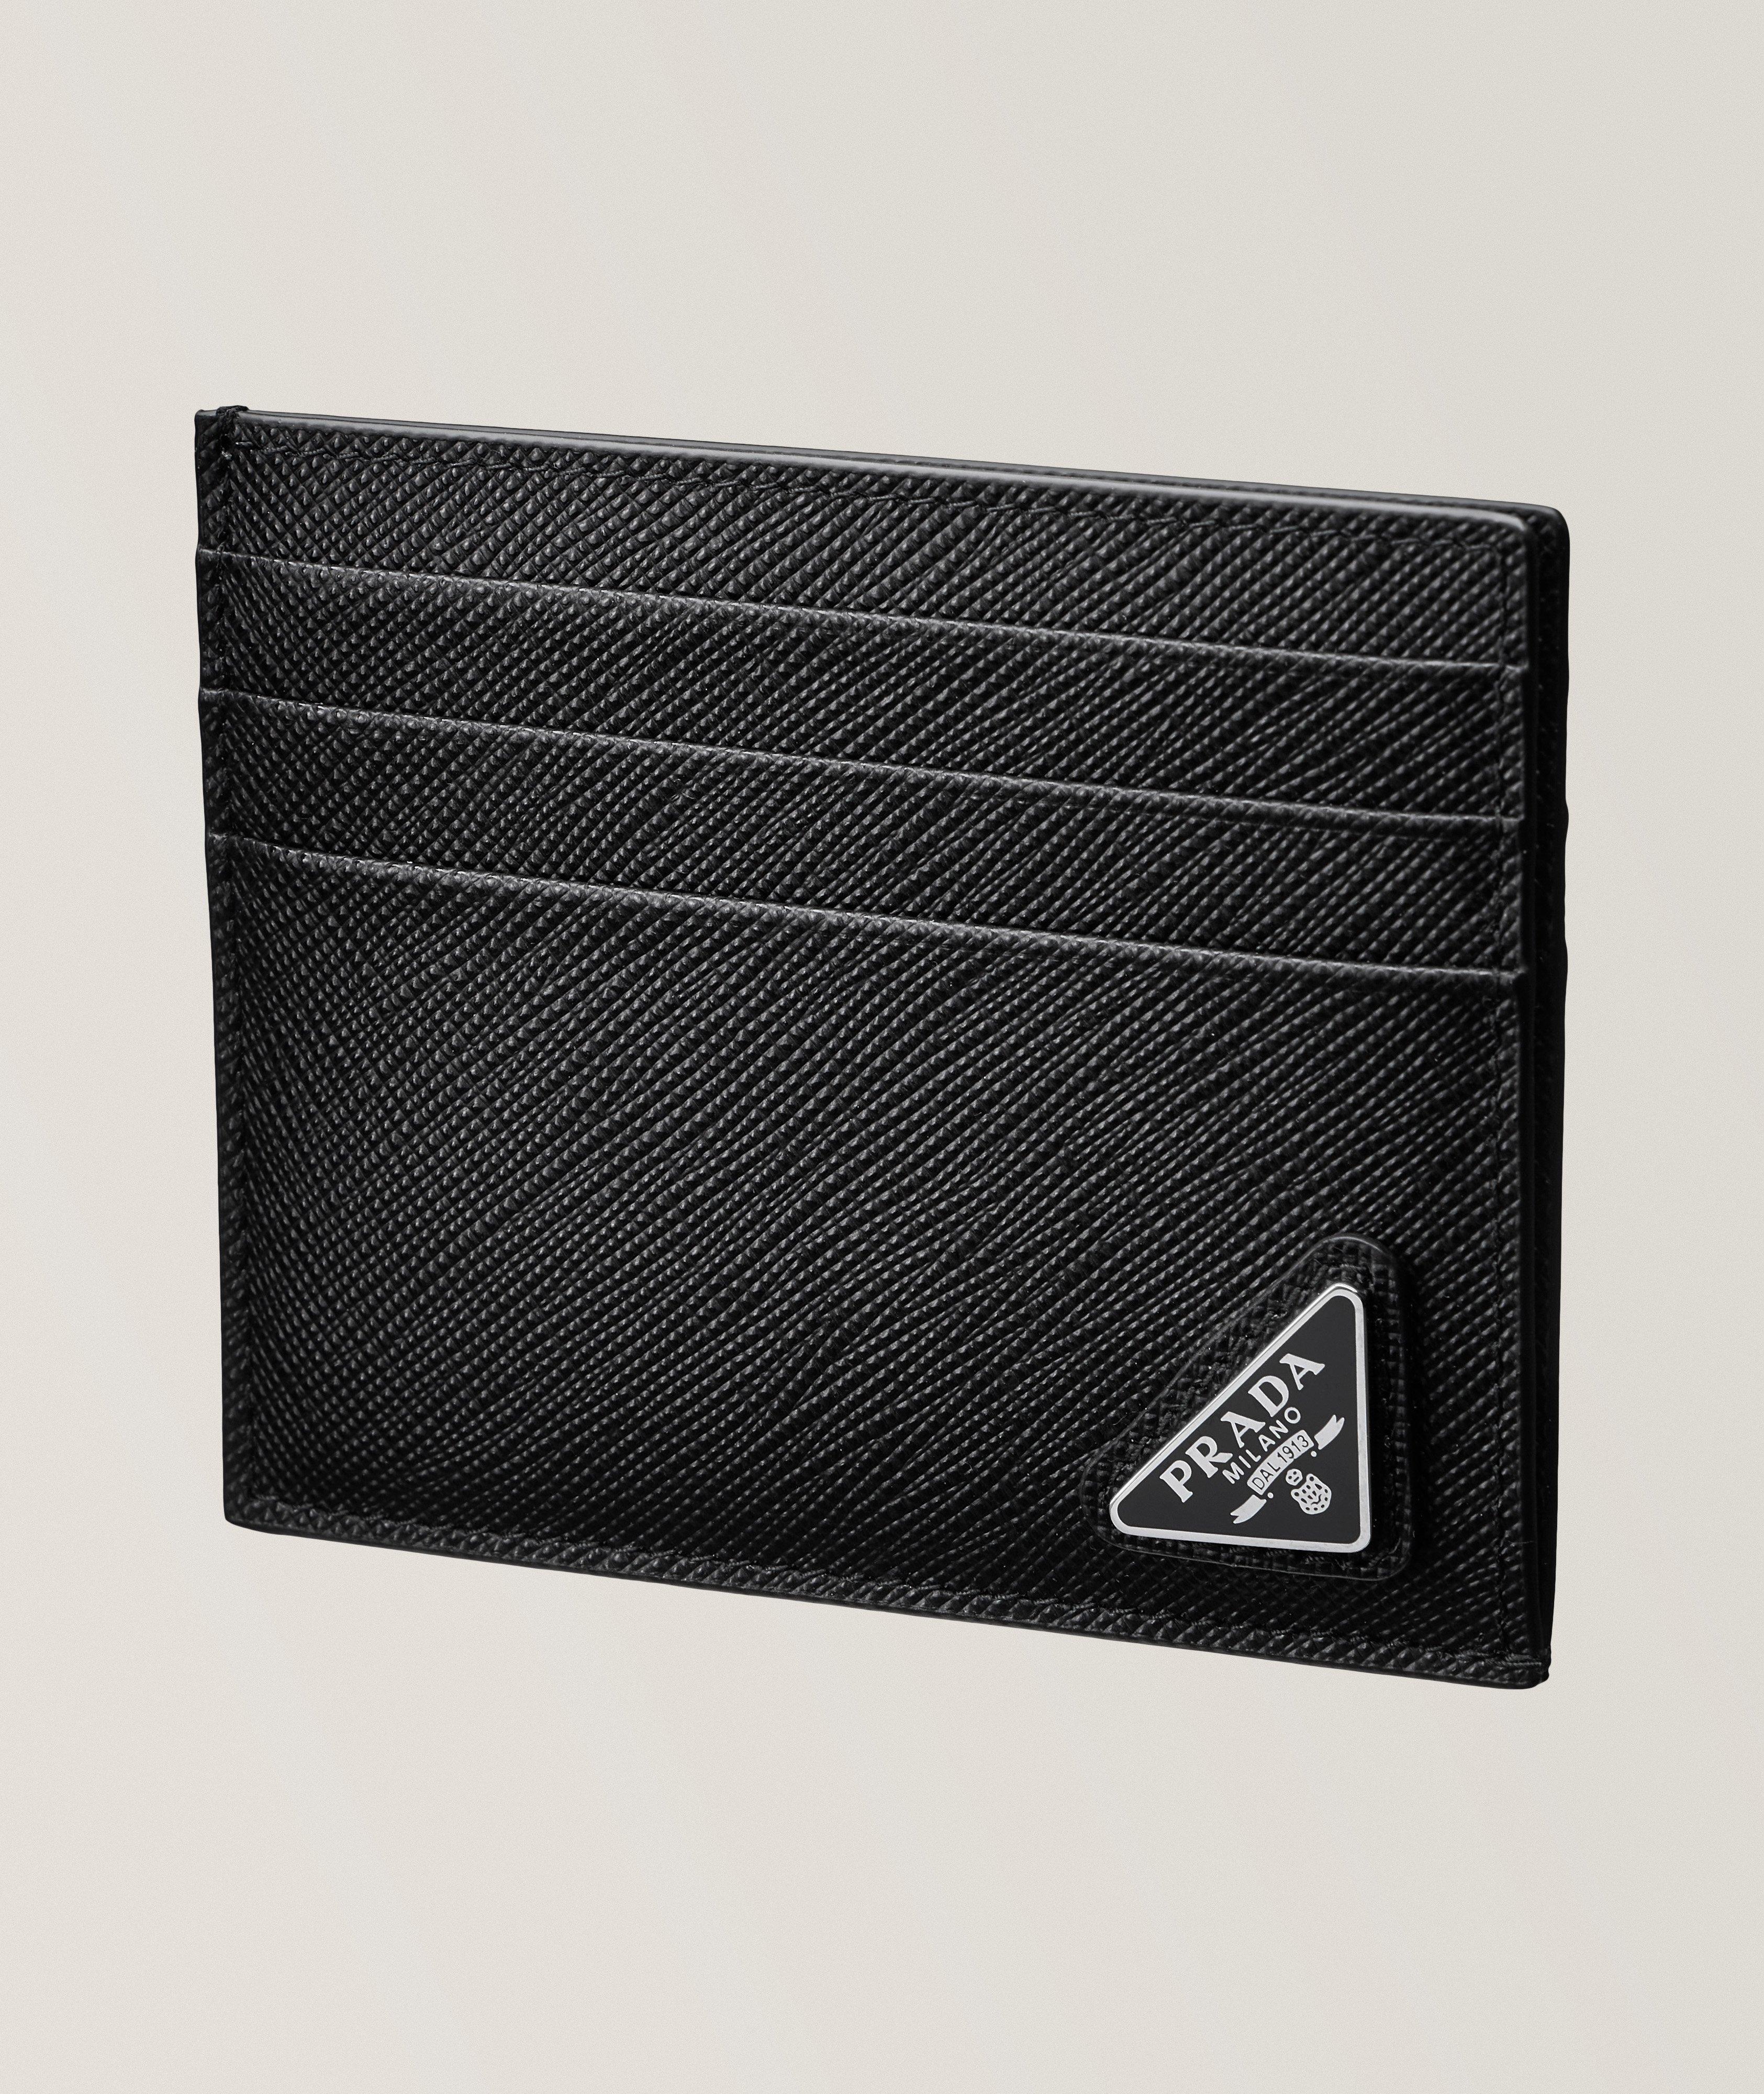 Textured Saffiano Leather Cardholder image 0